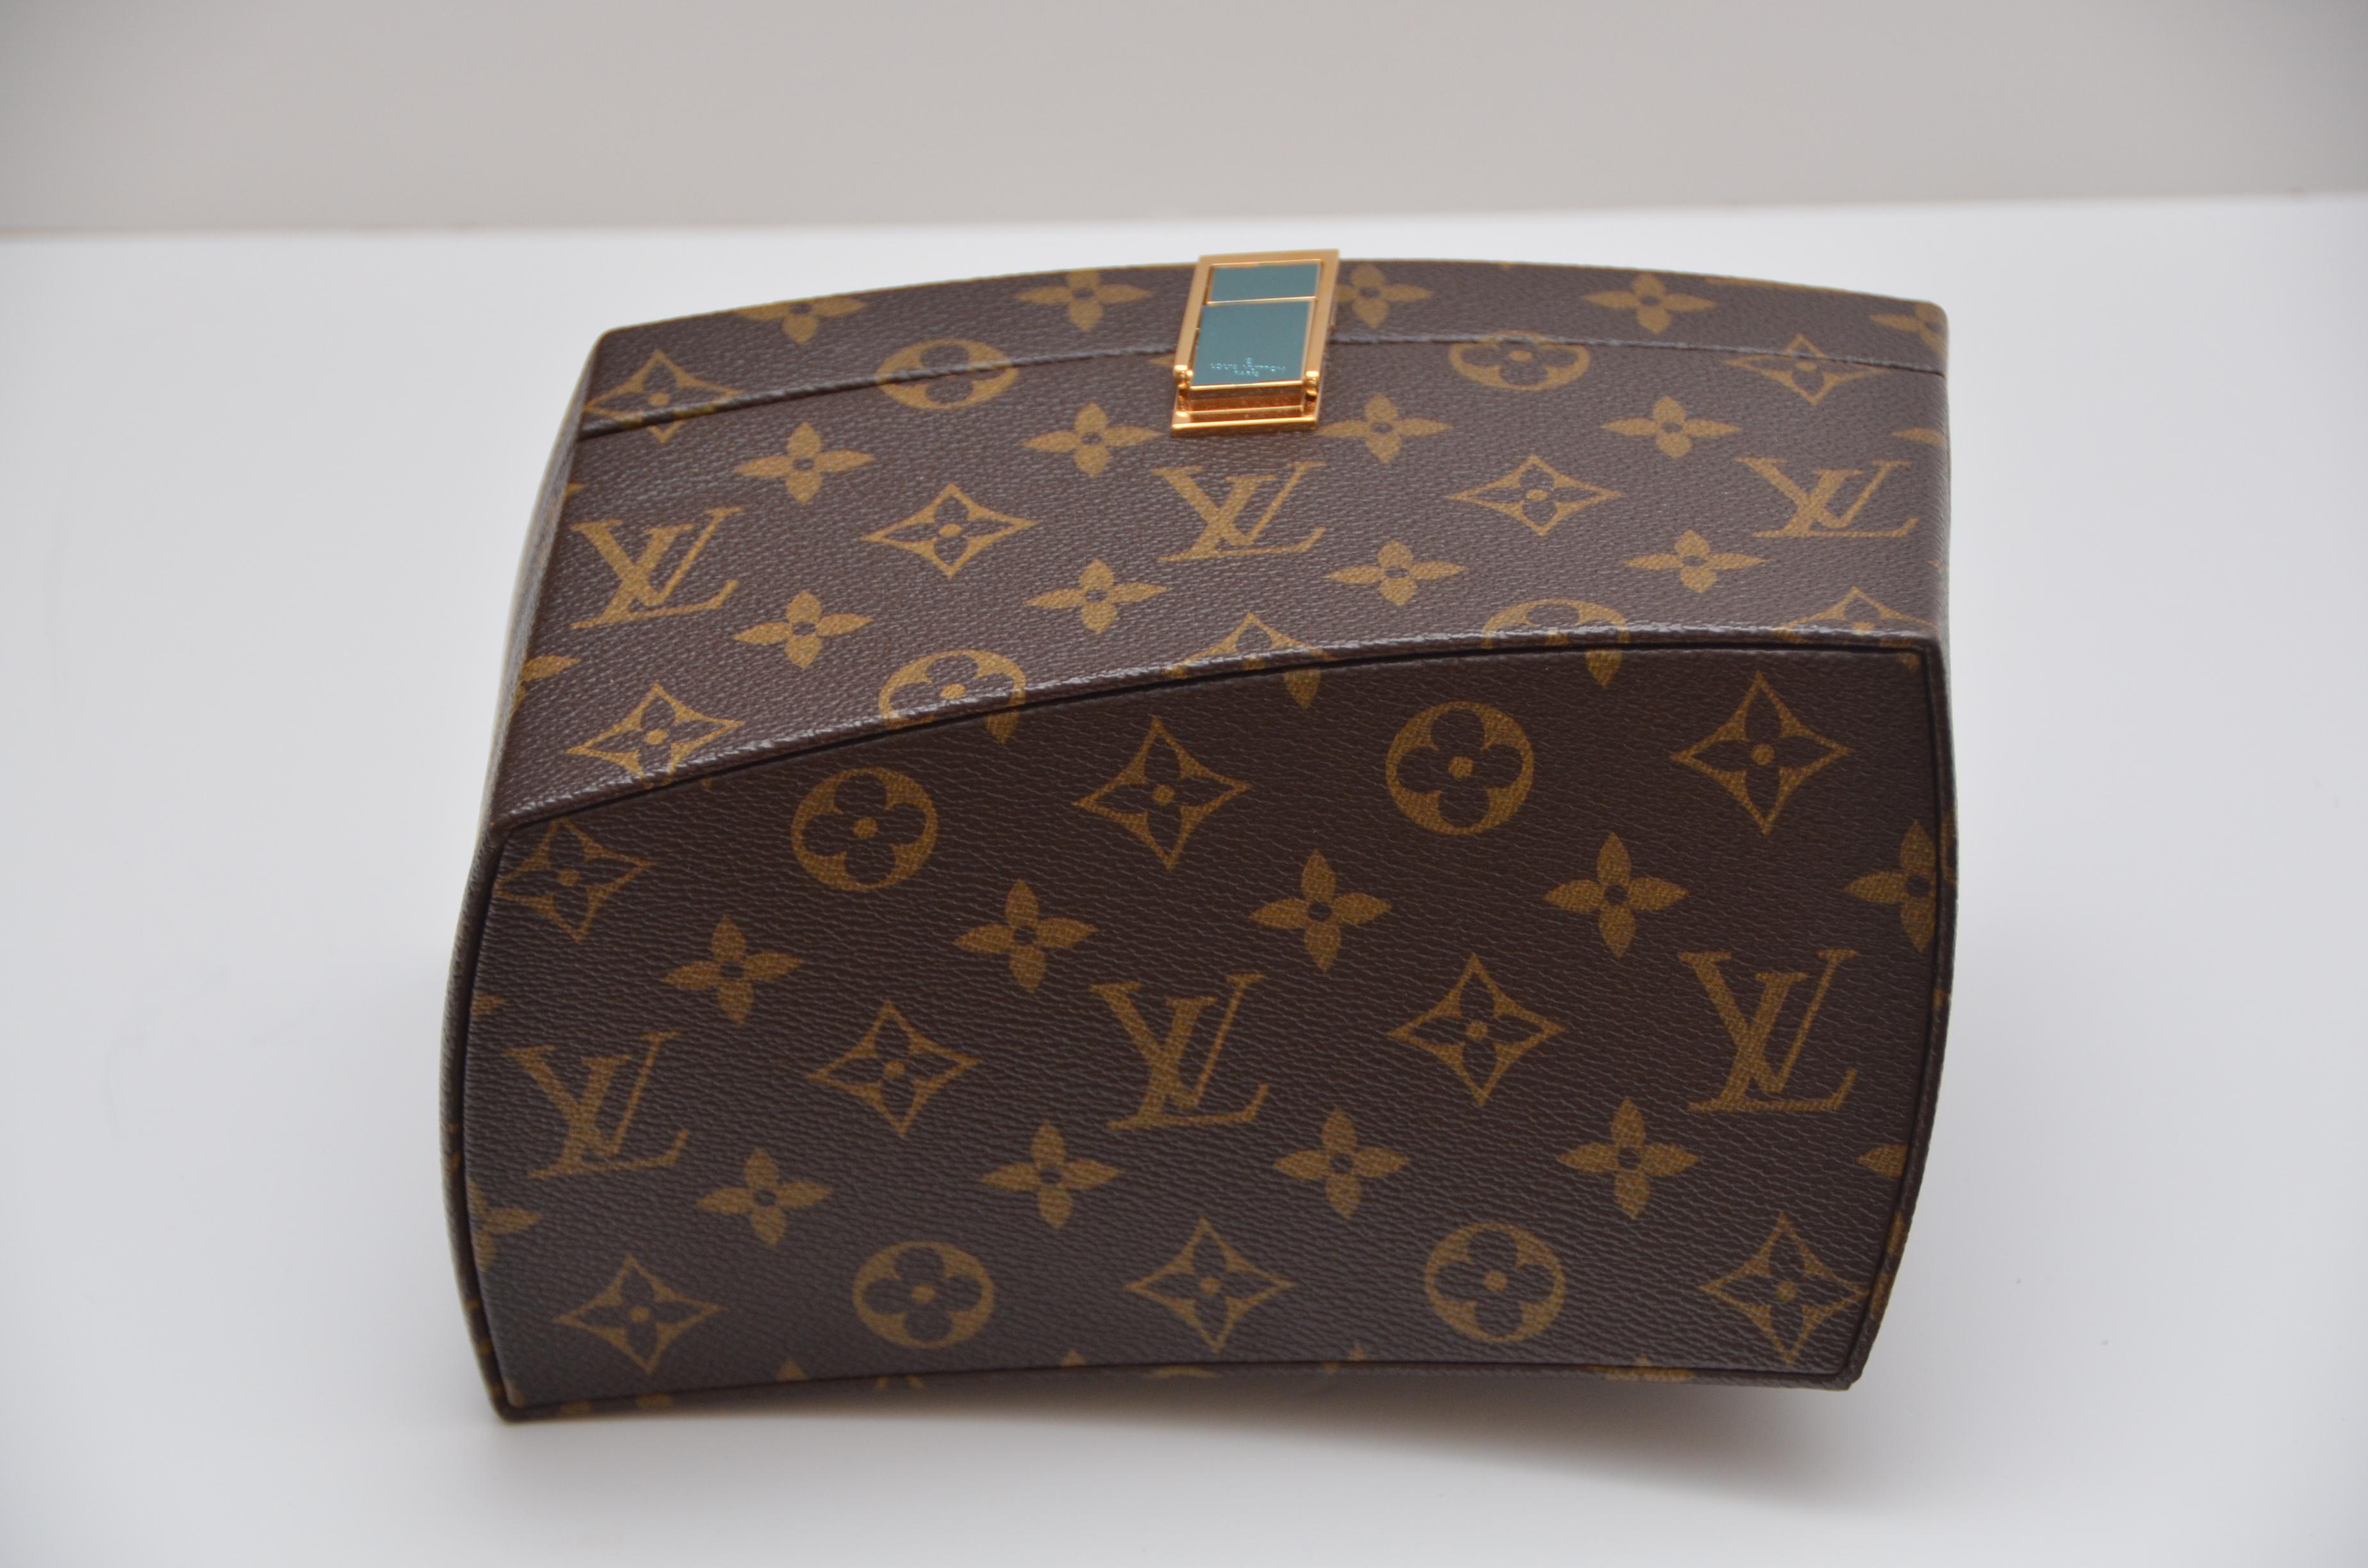 Black Rare Louis Vuitton. A Frank Gehry Iconoclast Twisted Box  Limited Edition  MINT 